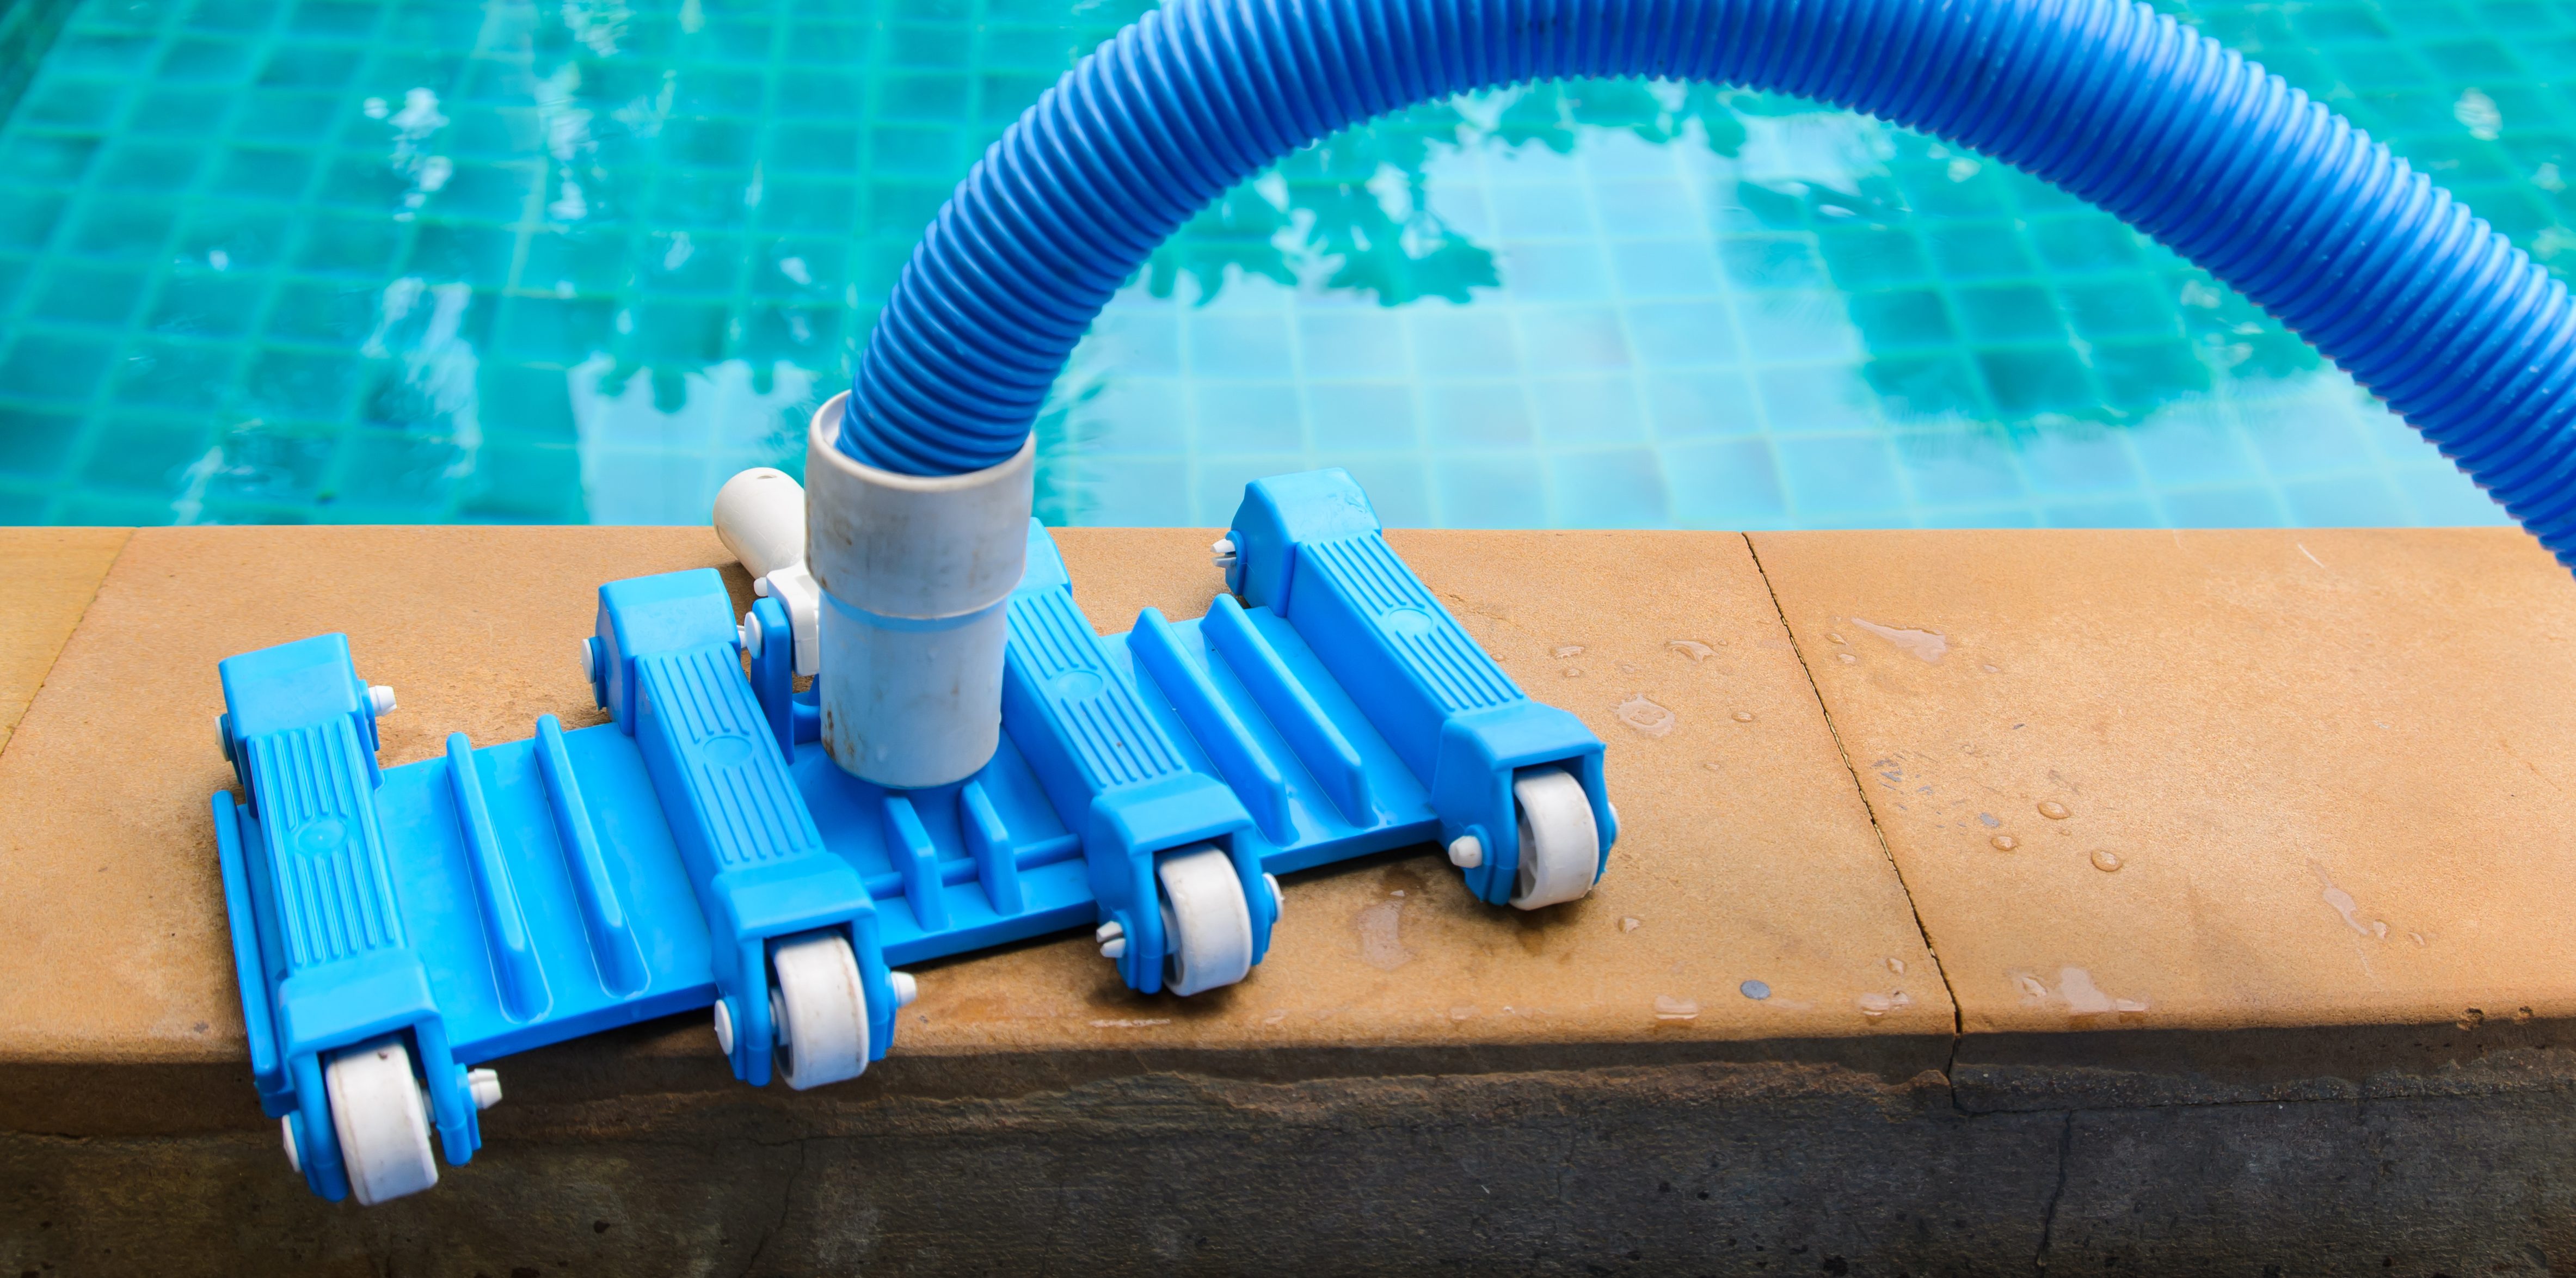 The Best Pool Cleaner Reviews, Ratings, Comparisons